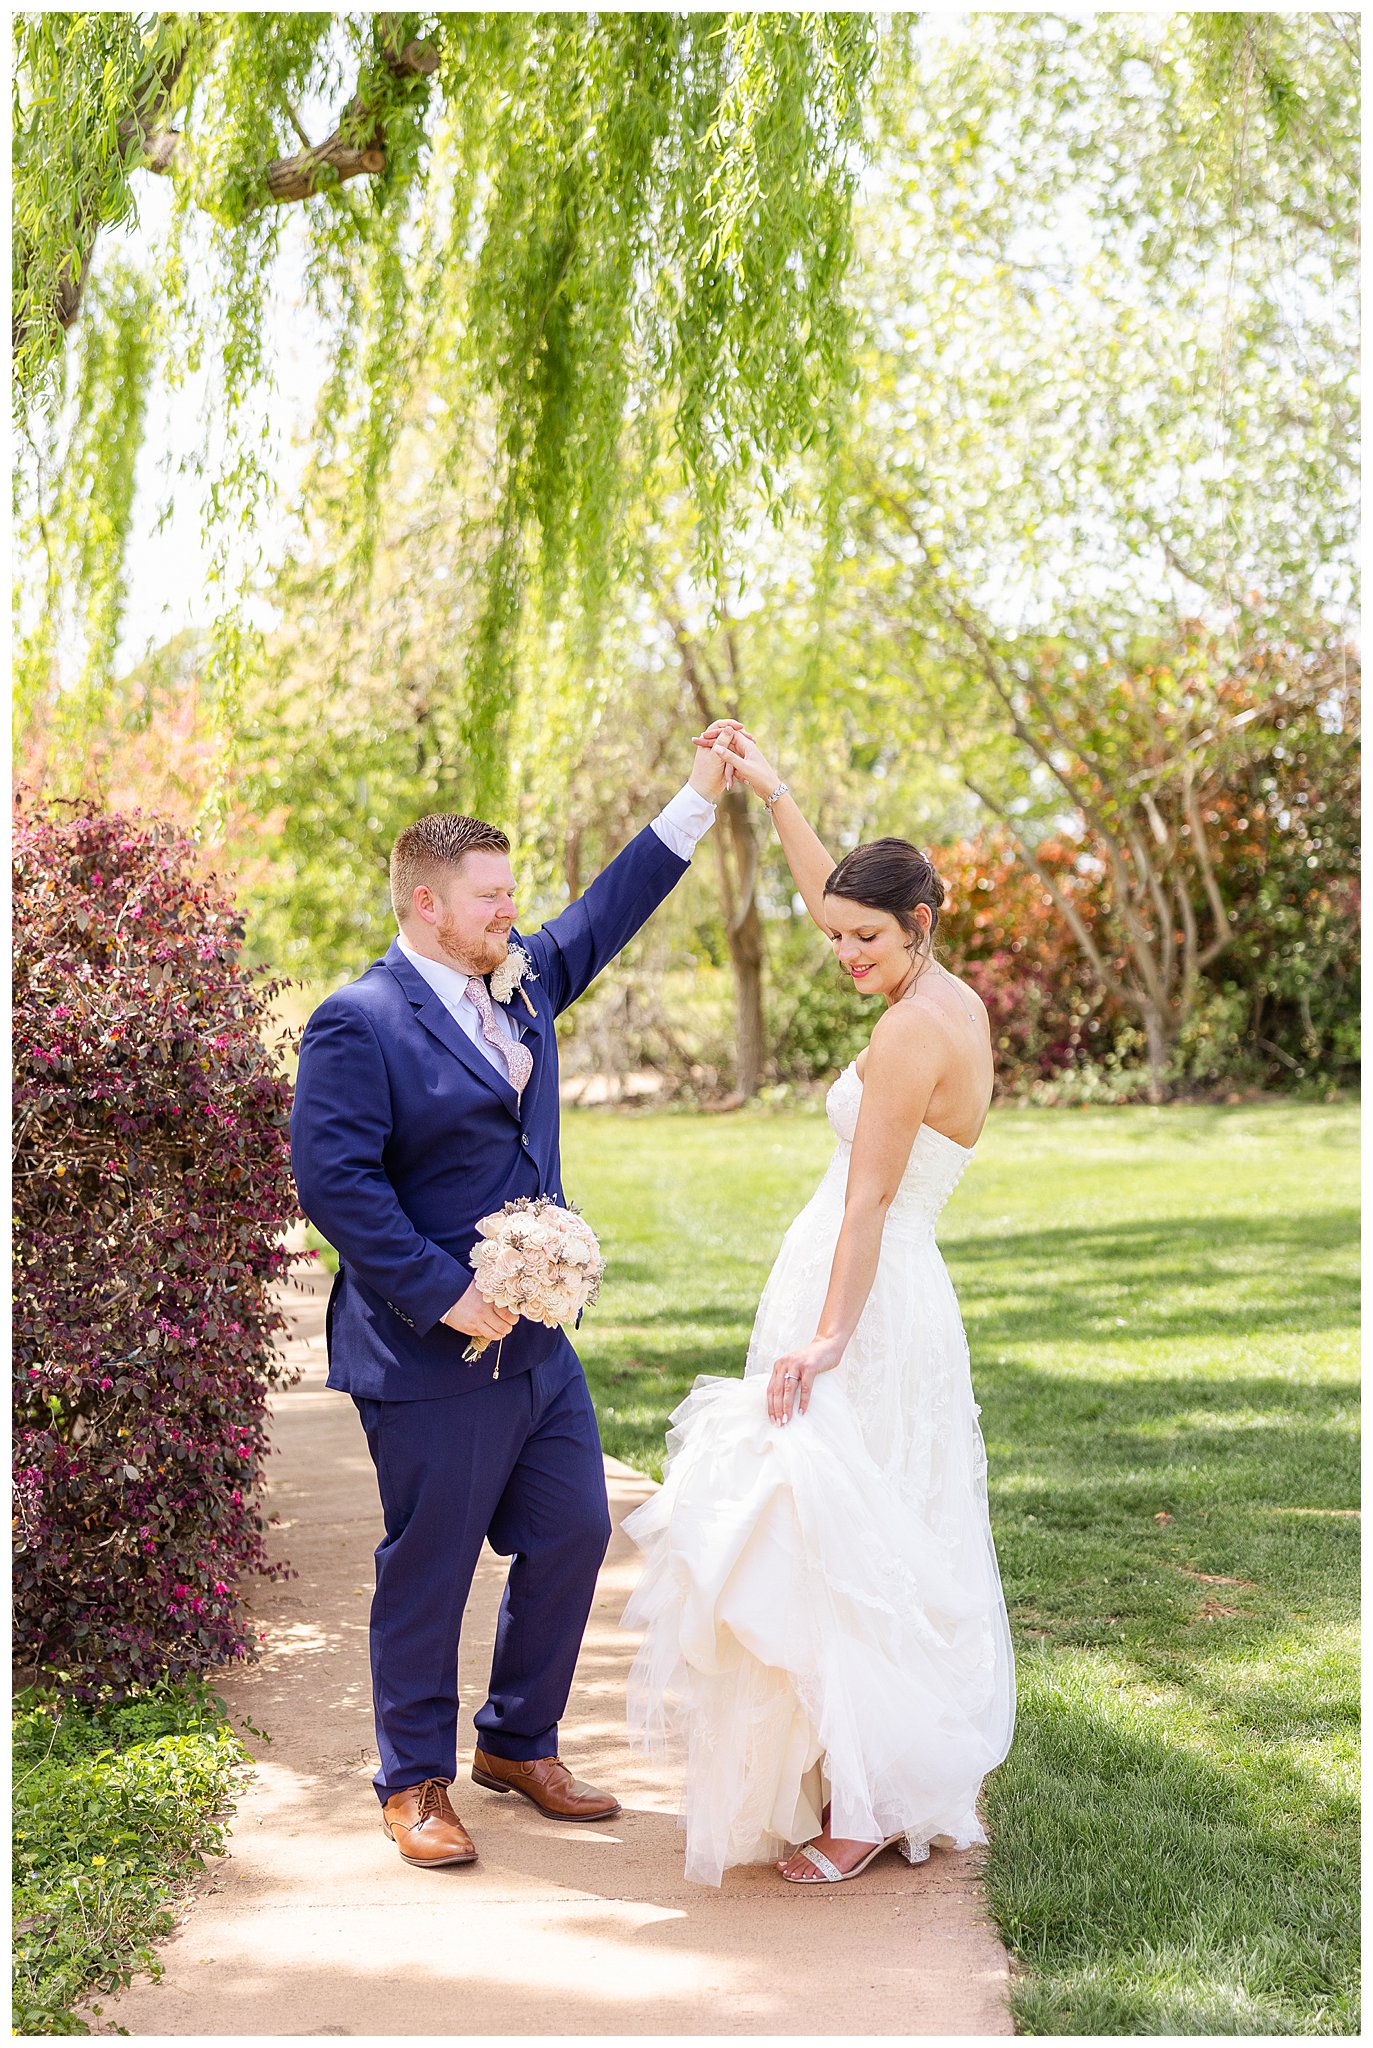 White Ranch Events Twirling Under Willow Tree | Meagan + Andrew